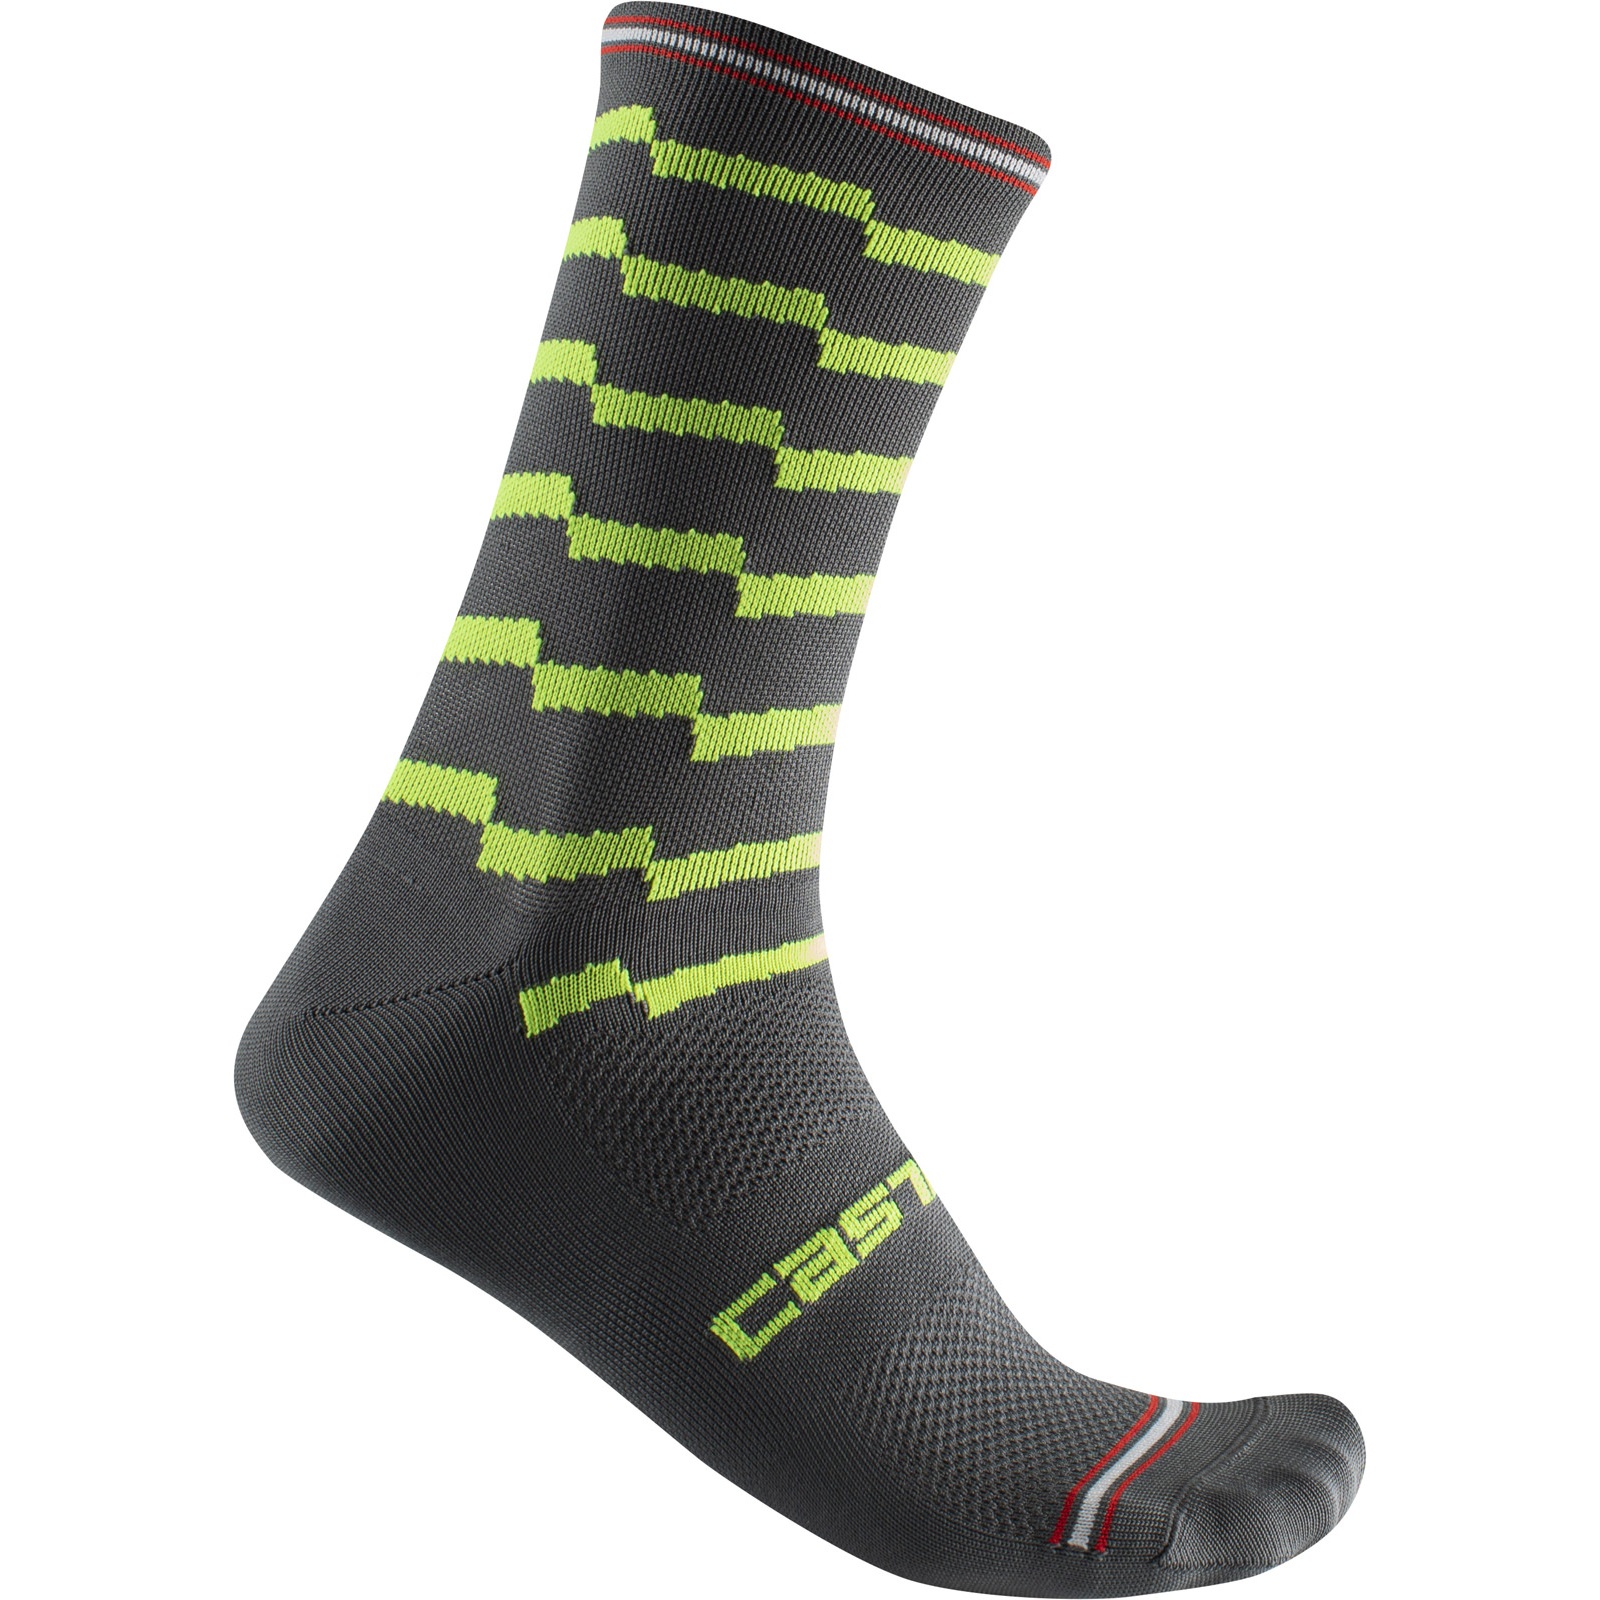 Picture of Castelli Unlimited 18 Socks - dark grey/electric lime 030